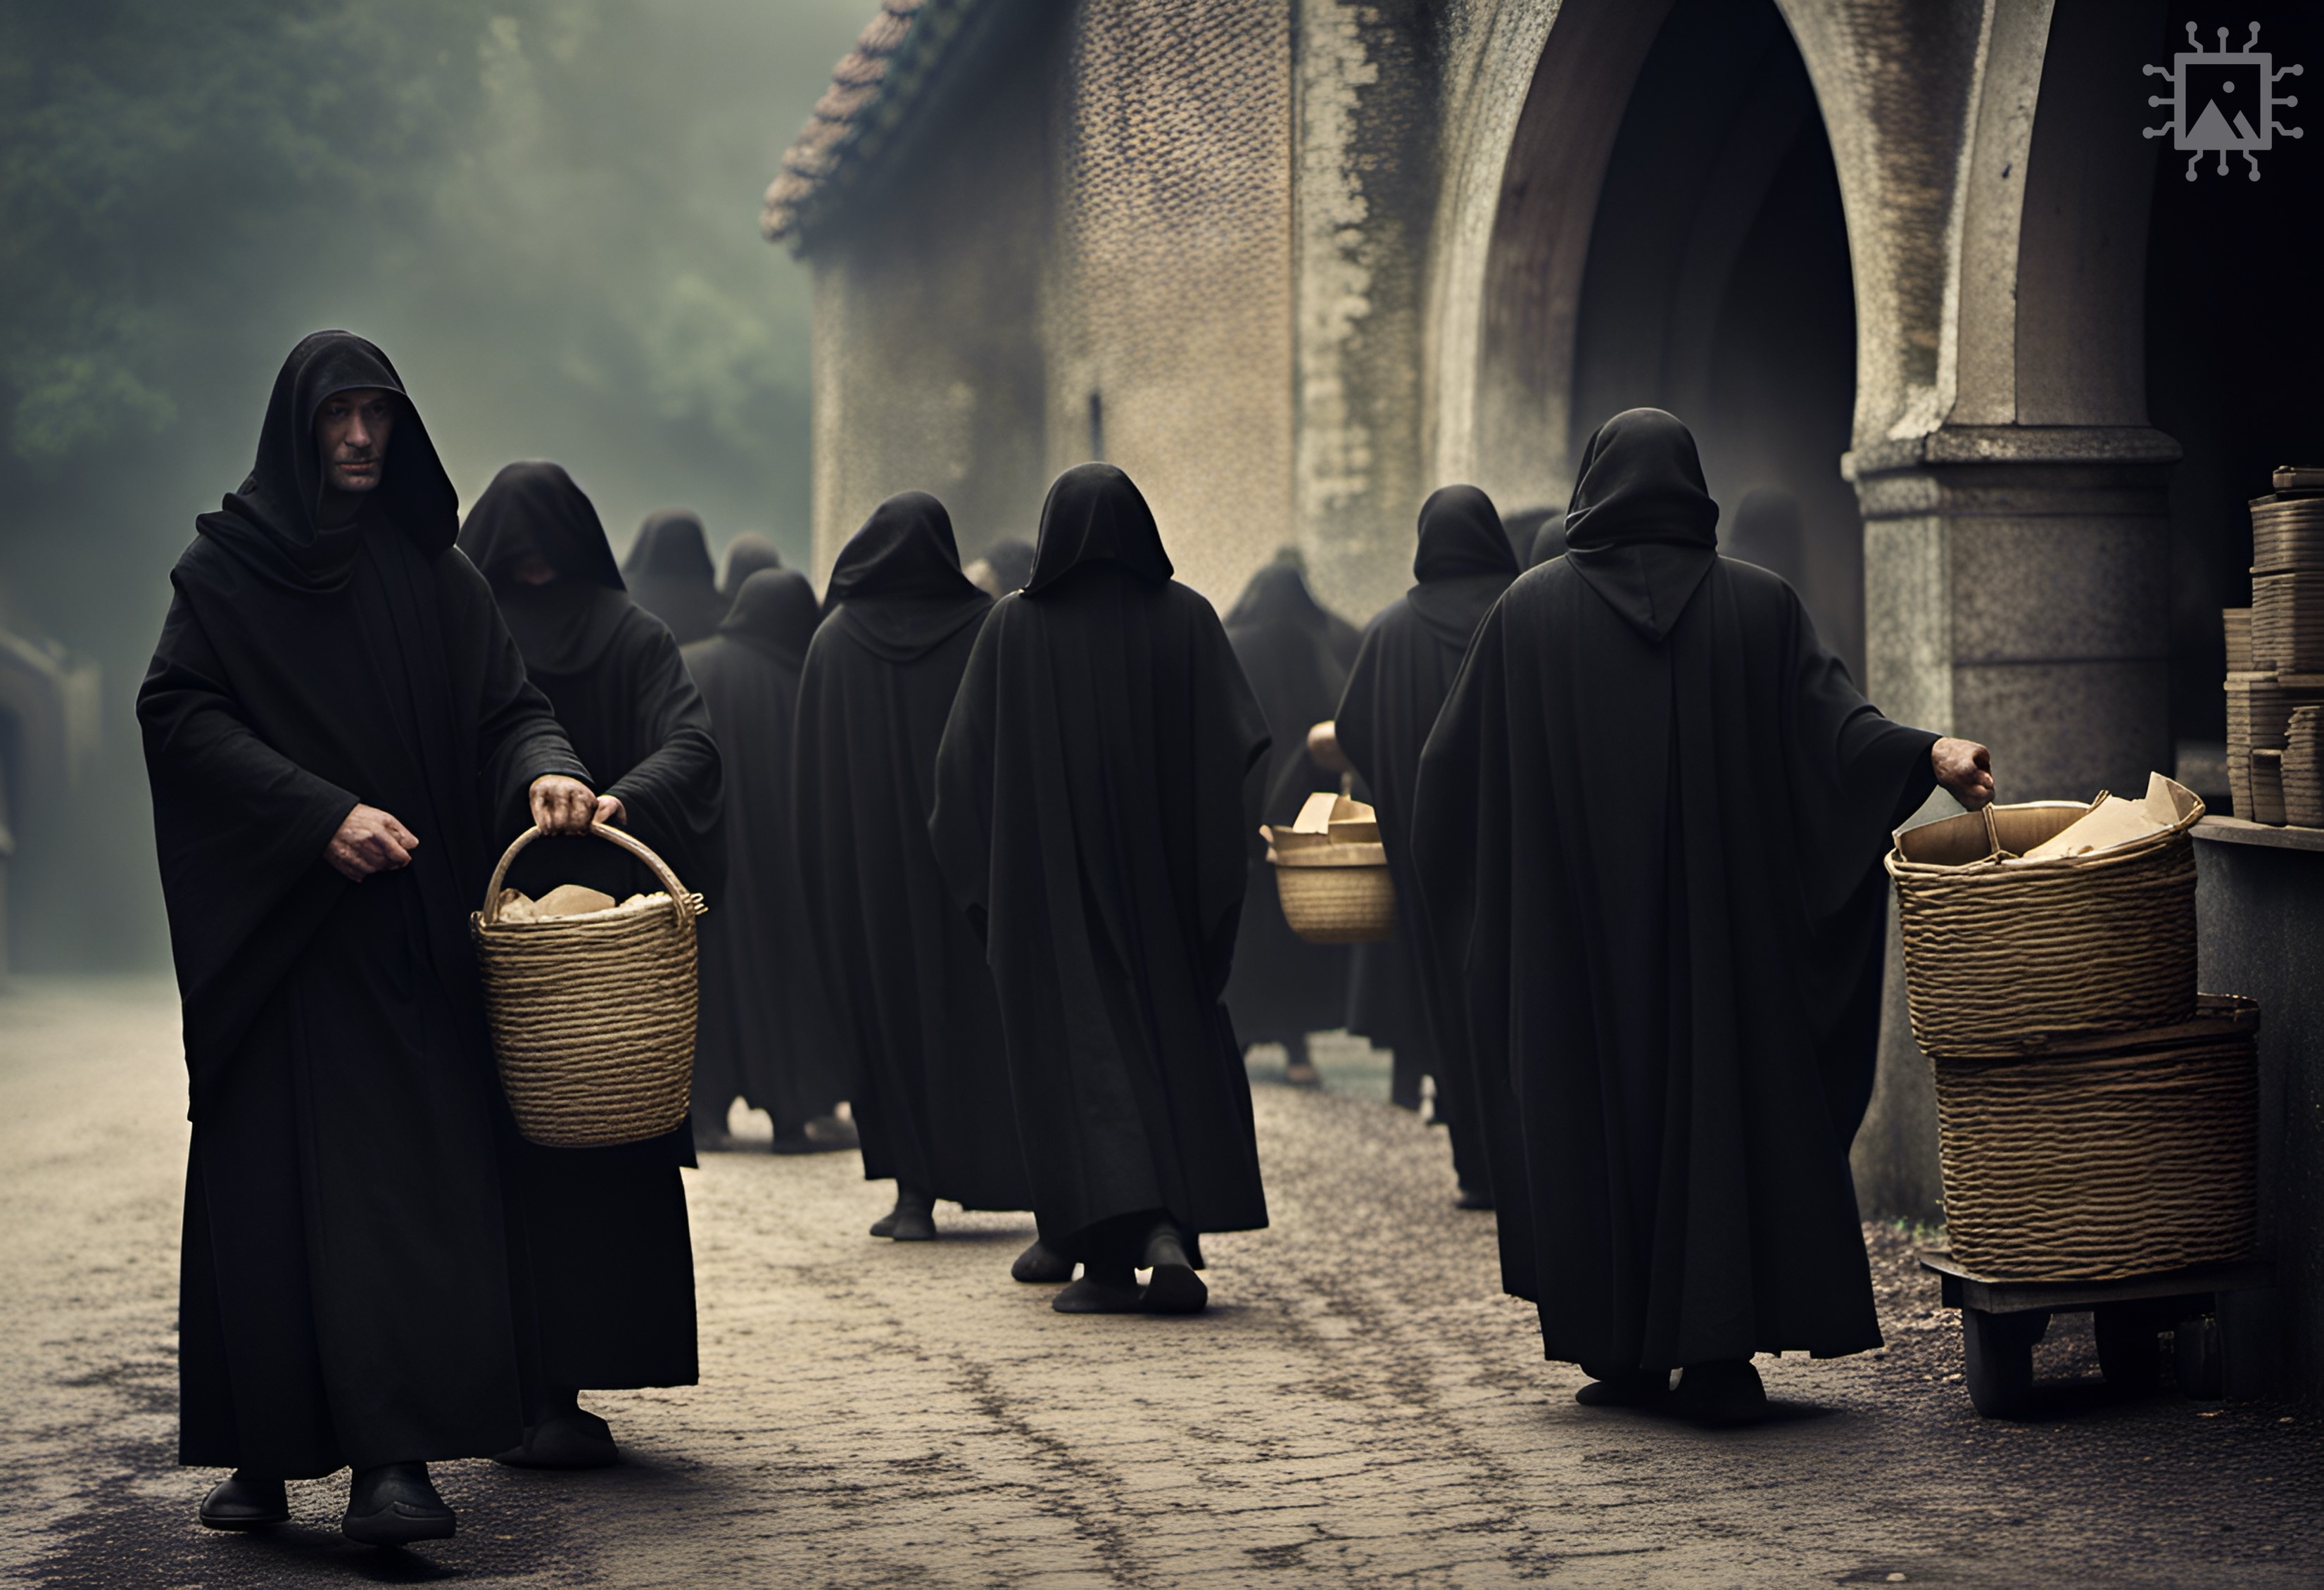 Artificial Intelligence-generated image produced using DreamStudio [accessed 14-08-2023]: ‘Early medieval Benedictine monks in black robes distributing alms to the poor.’ Find out more: rochestercathedral.org/research/ai